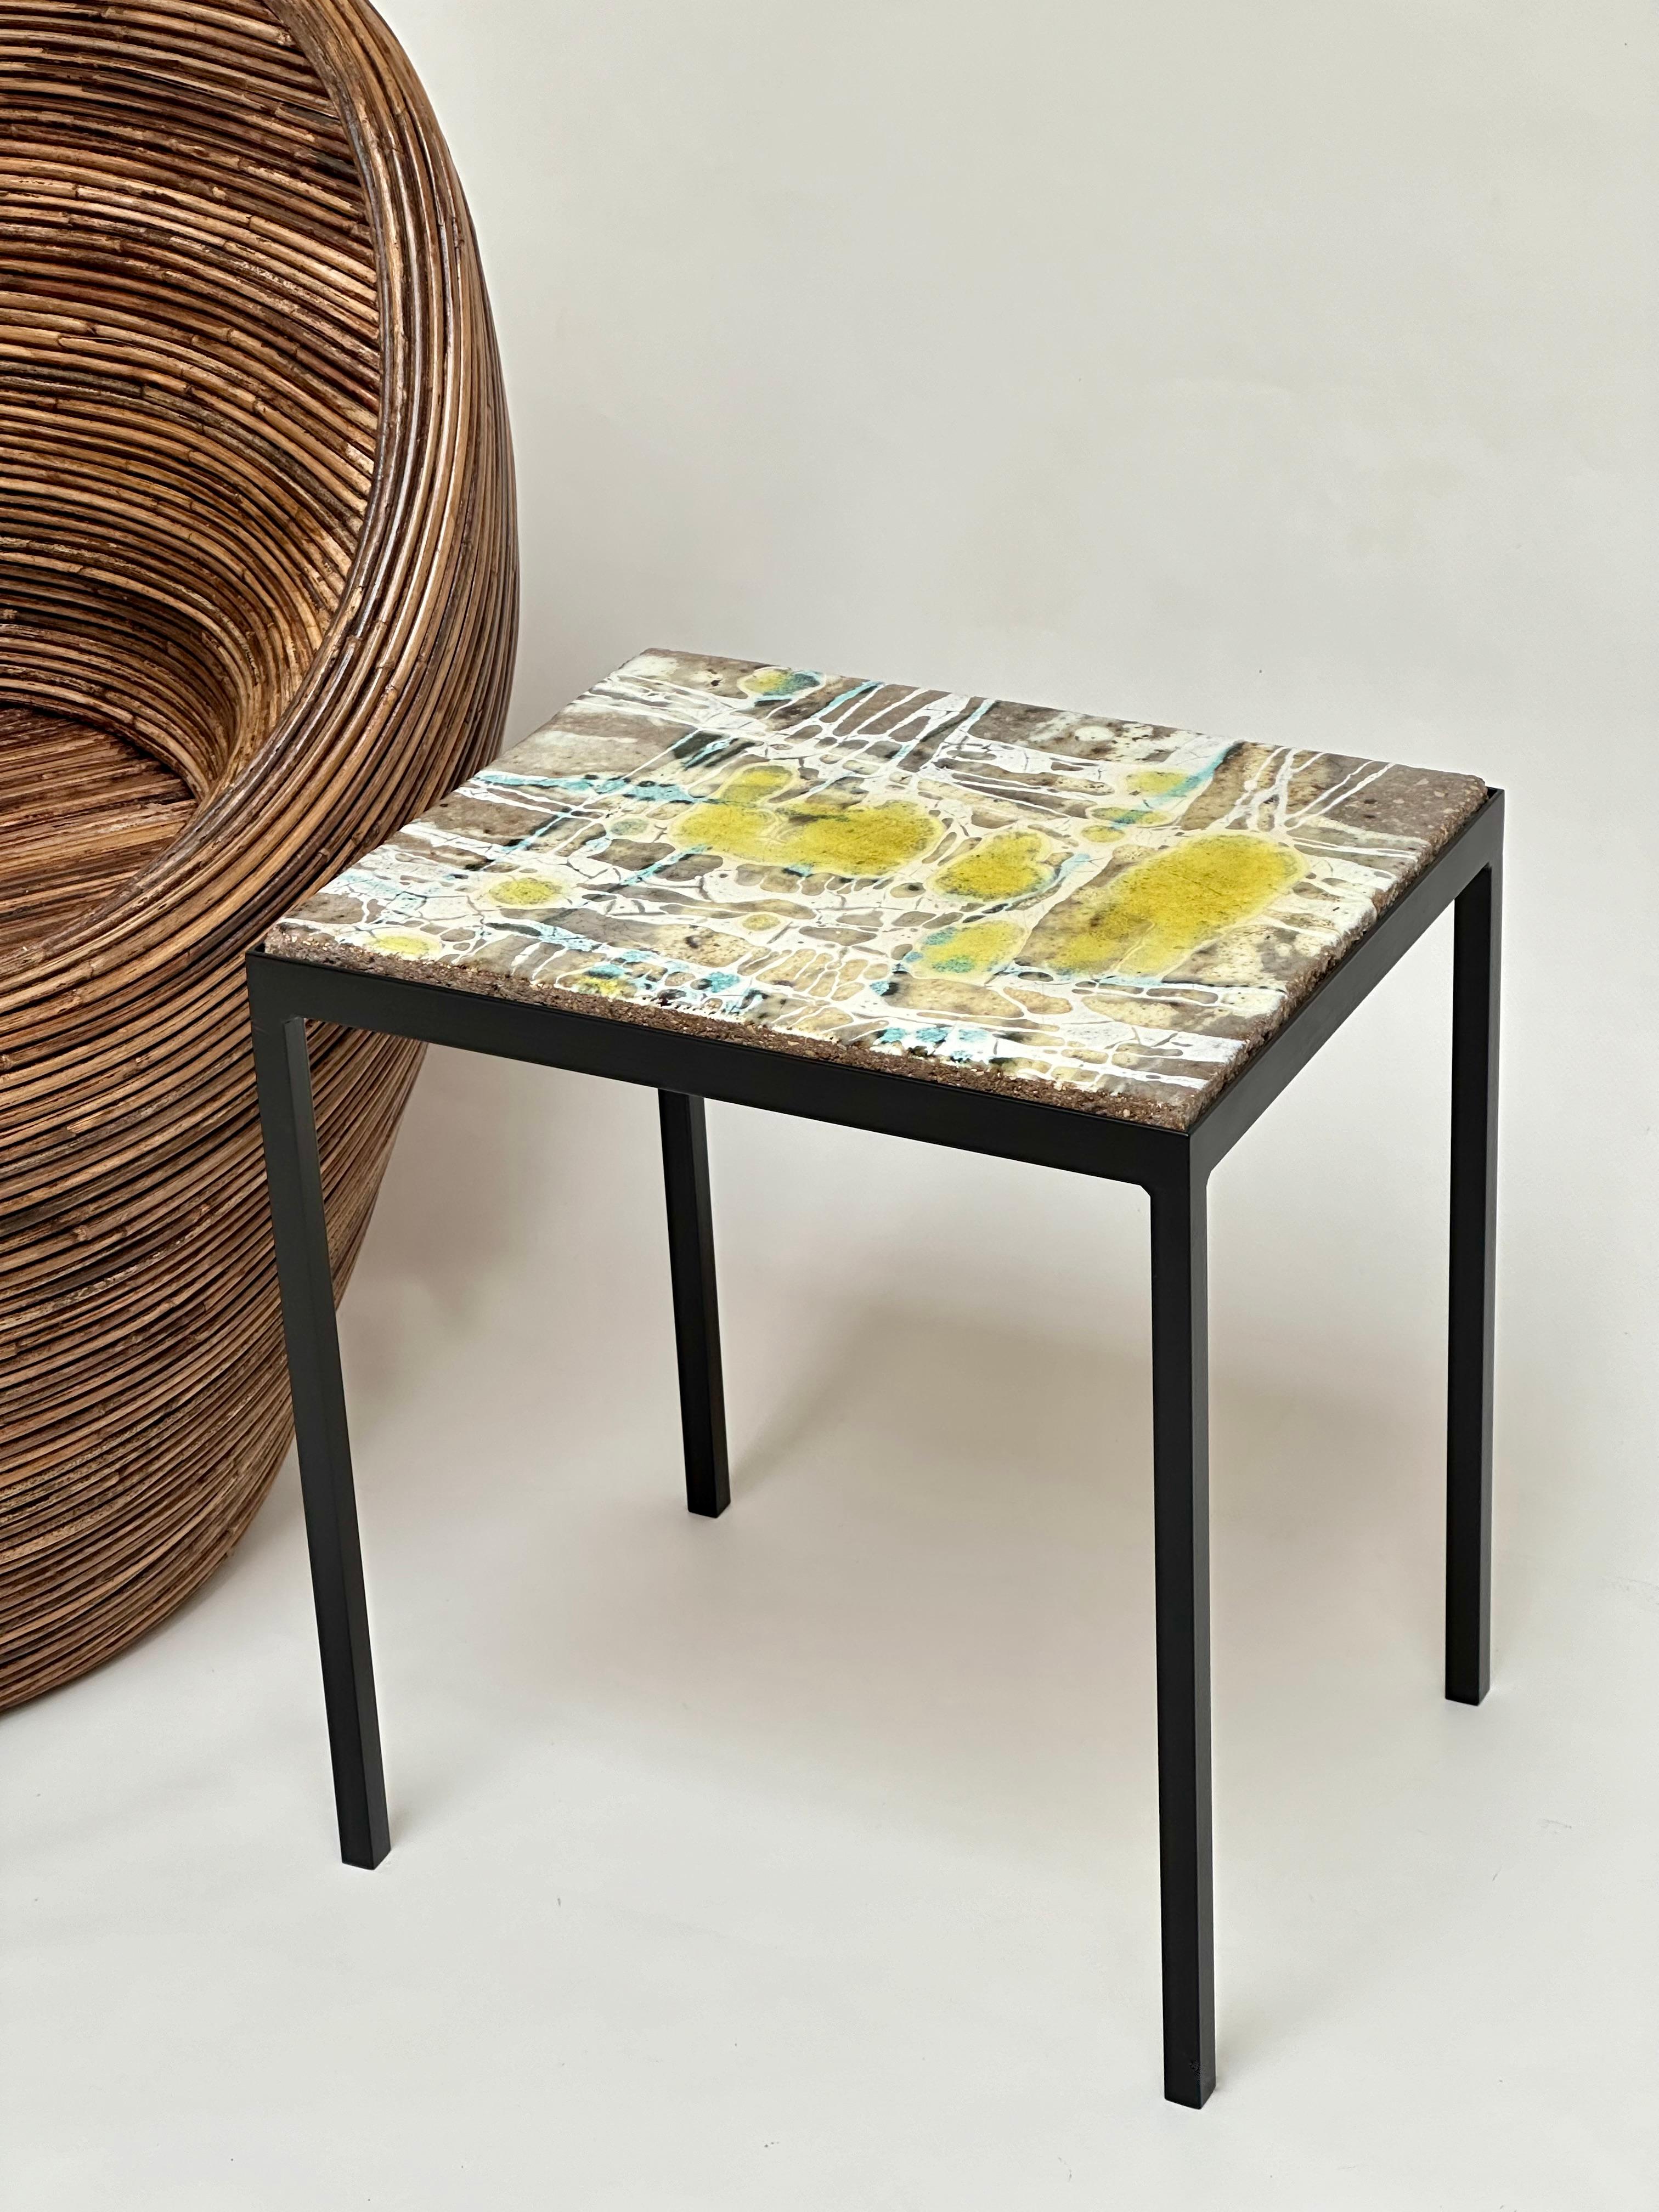 Decorative Low Table, Jo Amado, France 1962 For Sale 4